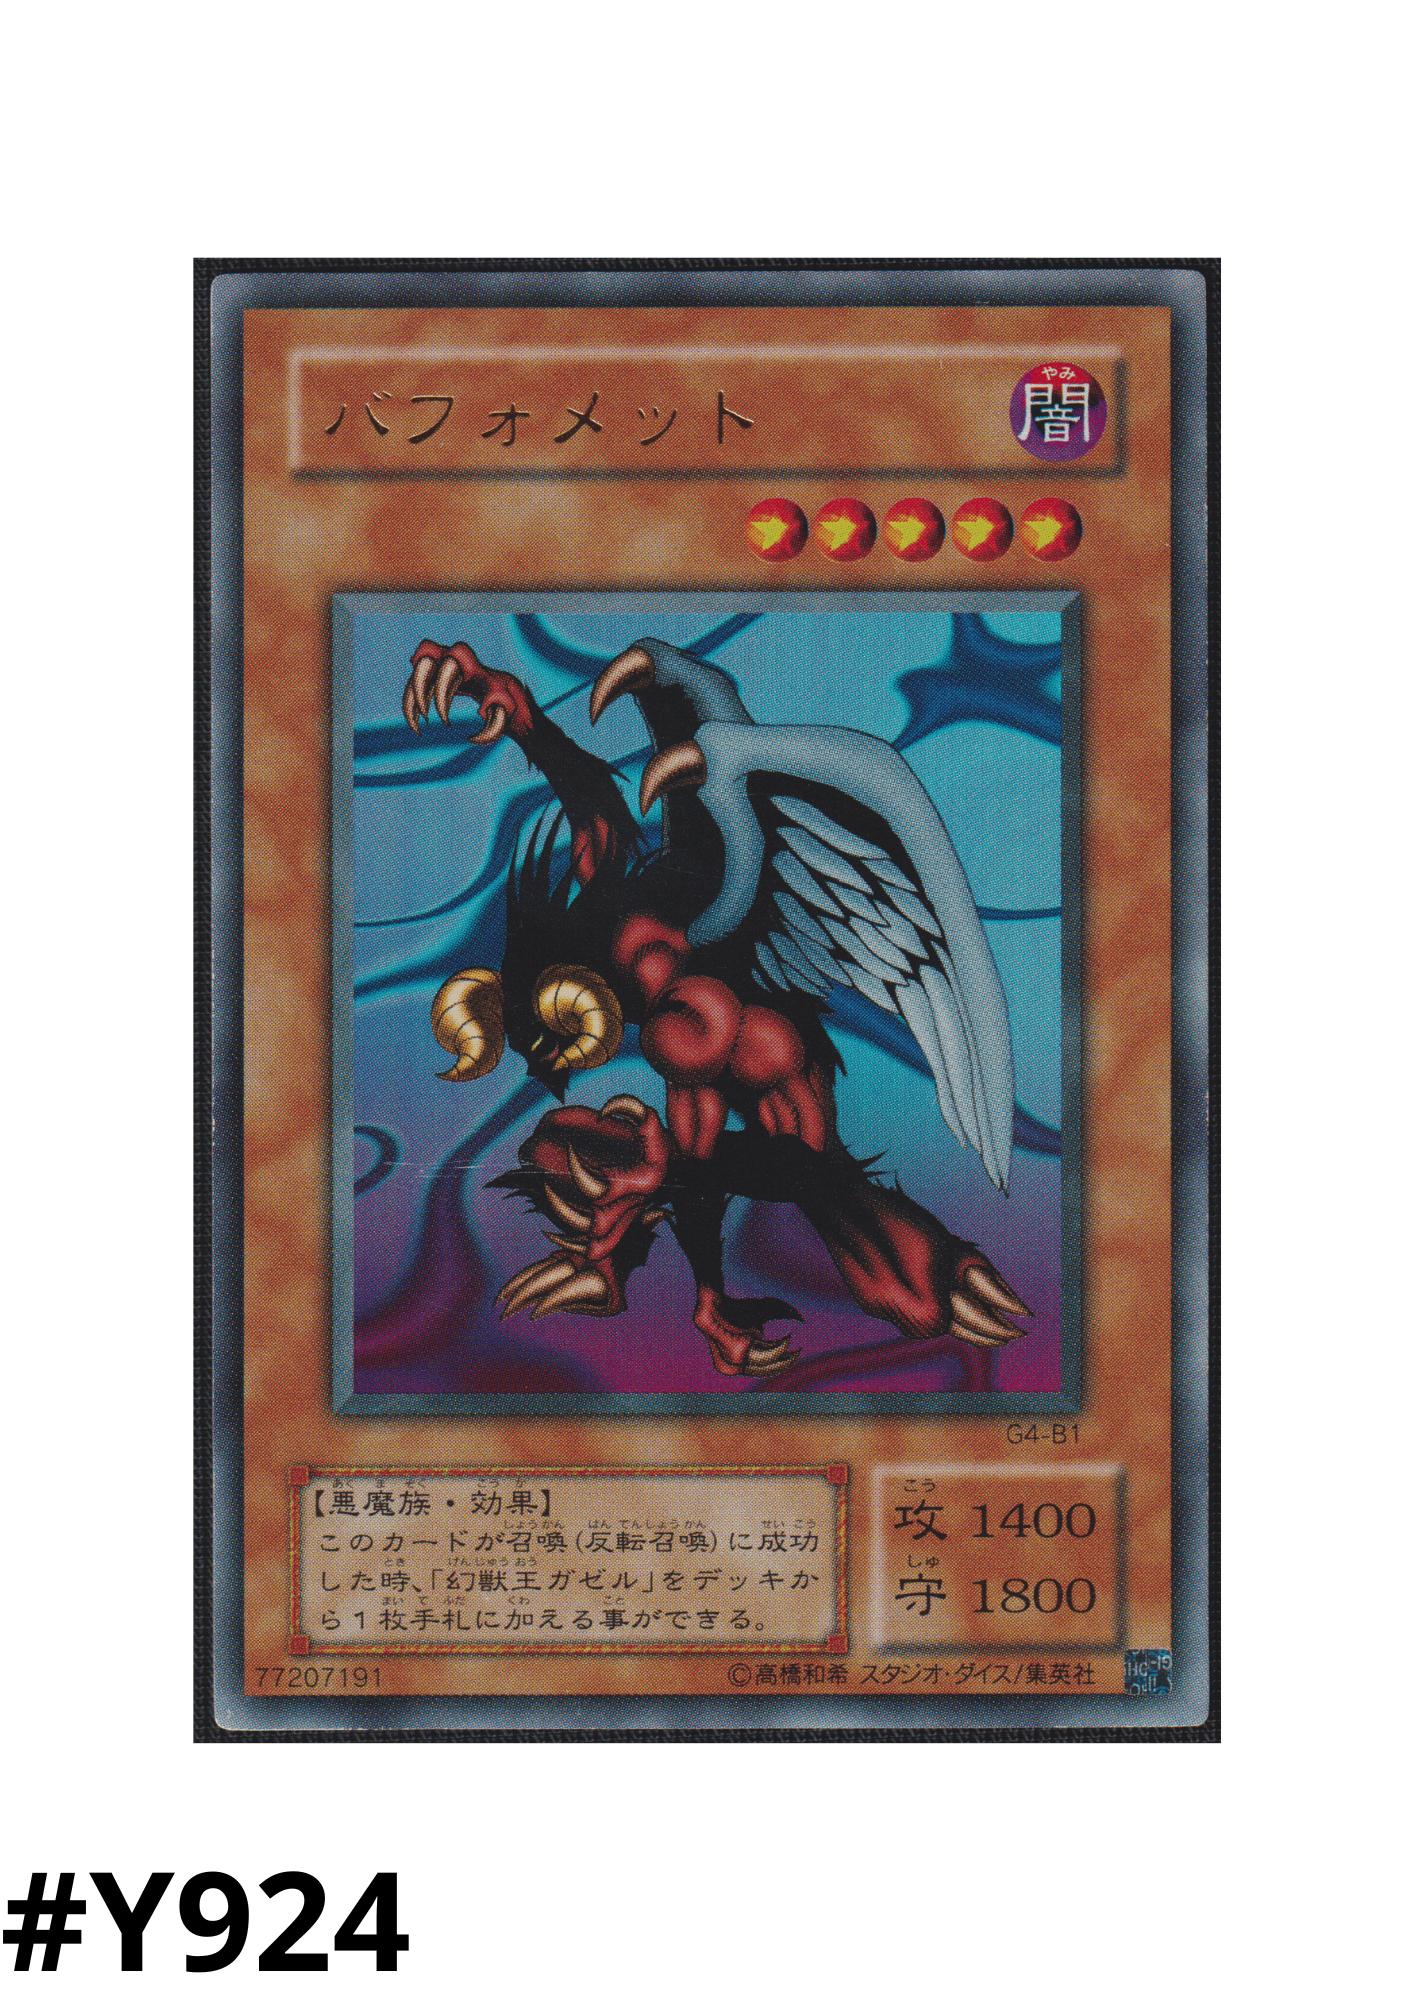 Berfomet G4-B1 | Yu-Gi-Oh! Duel Monsters 4: Battle of Great Duelist Game Guide 1 promotional card